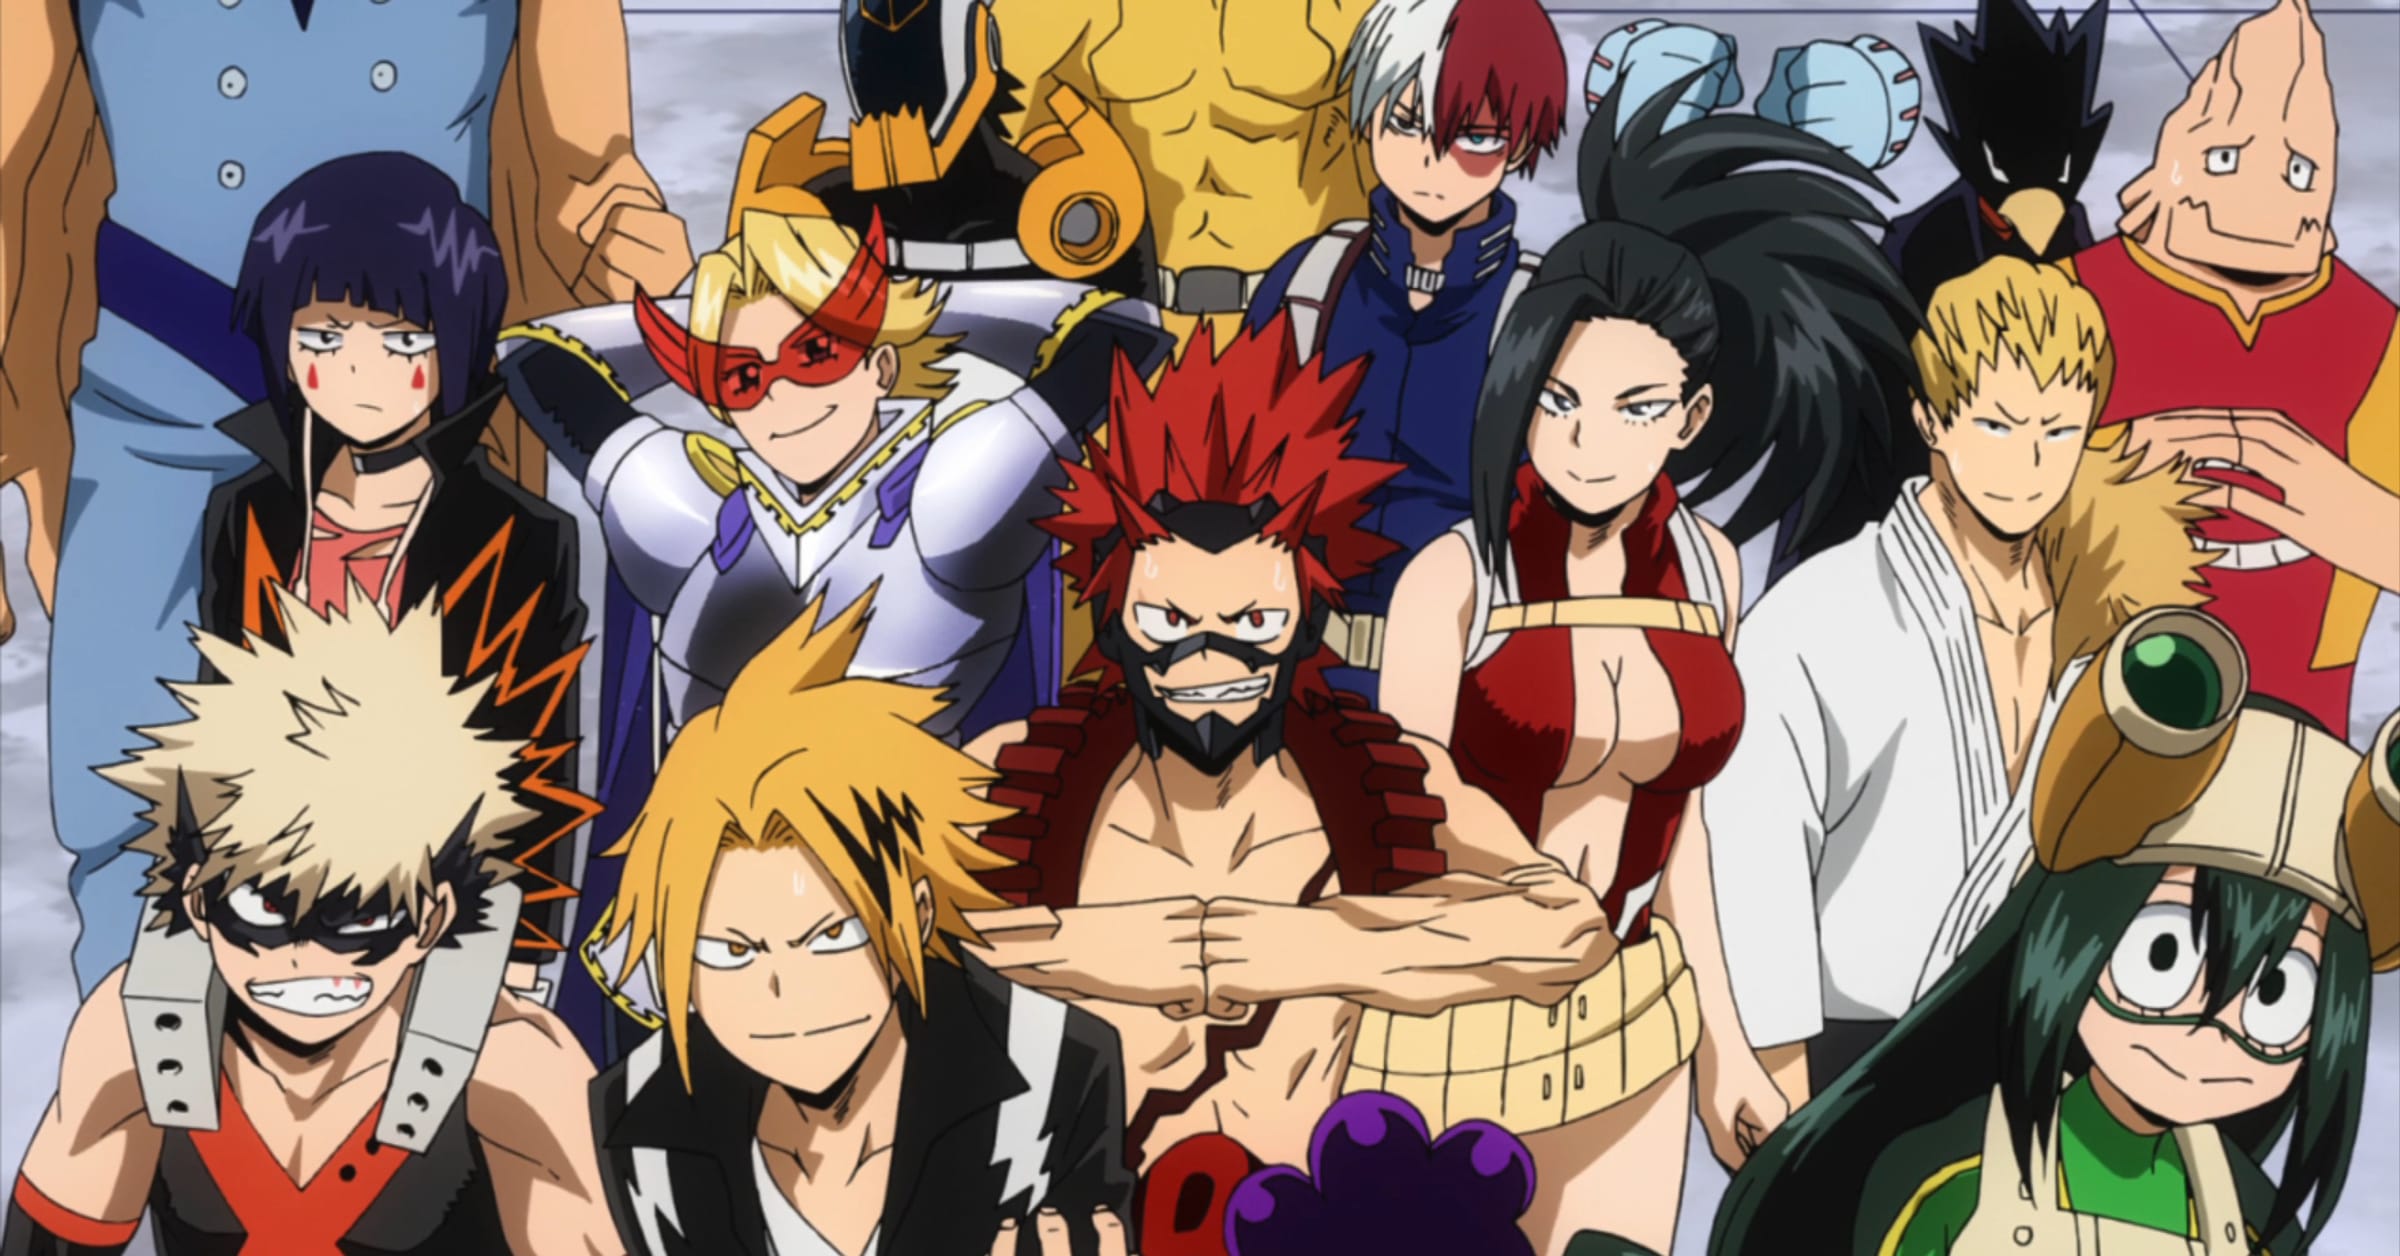 The 15 Strongest Characters in My Hero Academia, Ranked